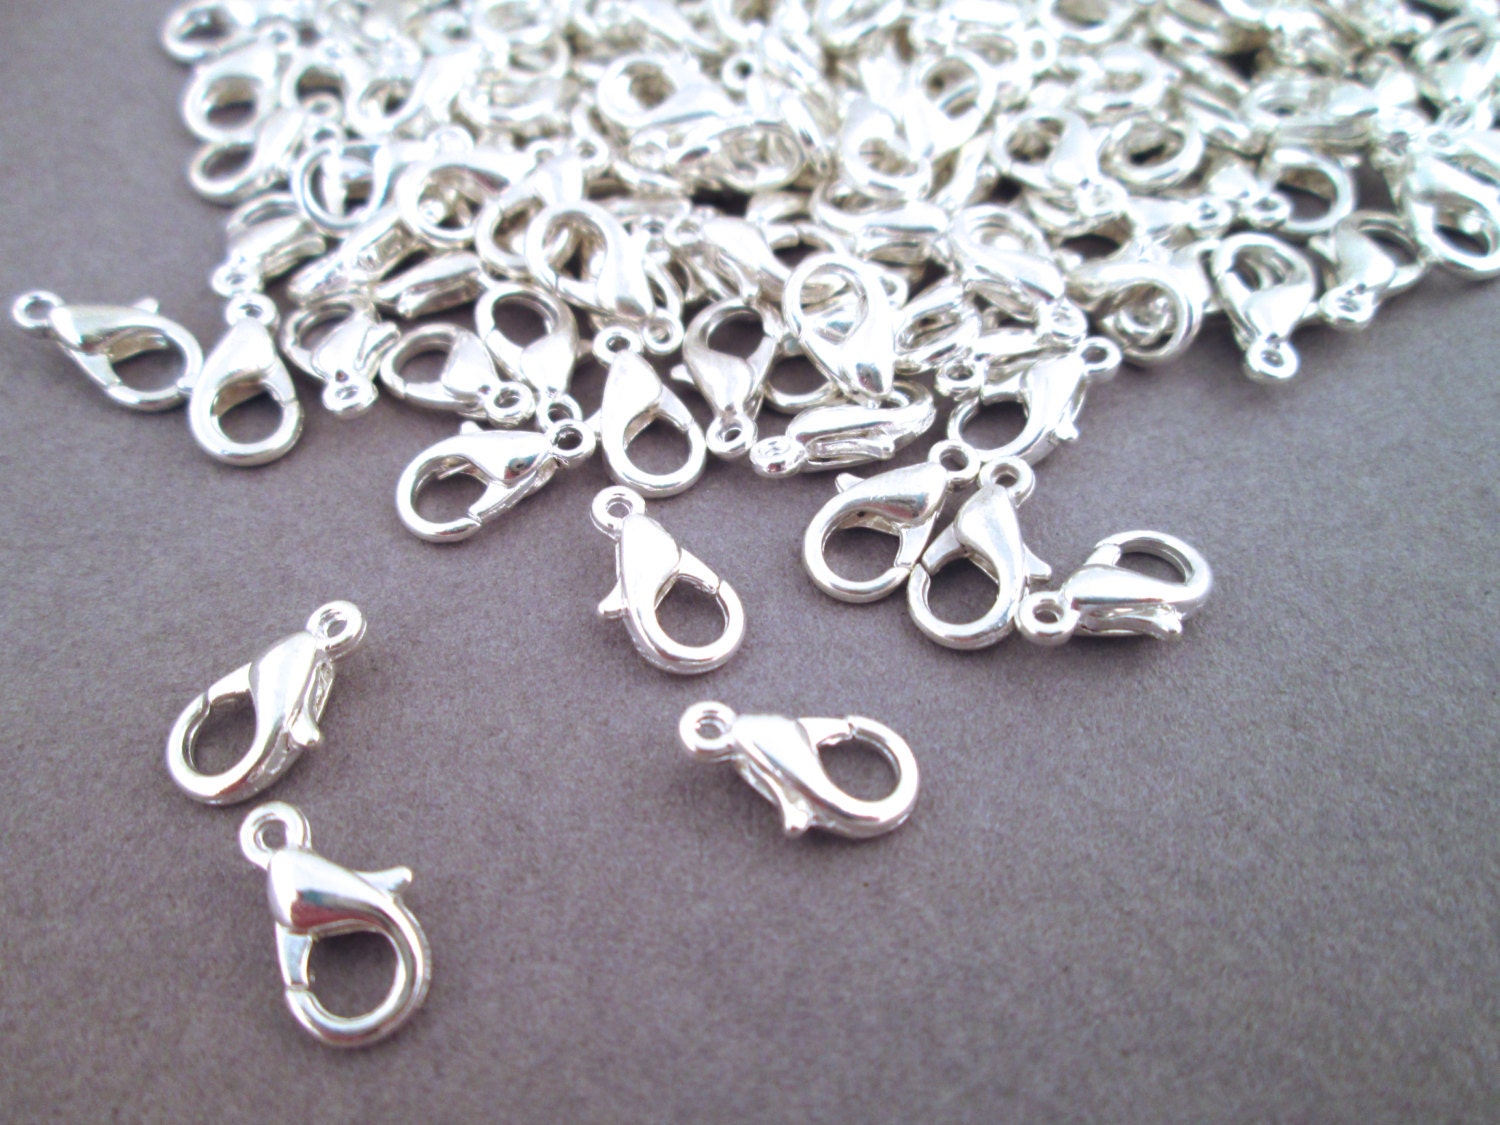 1 Pc Bag of 4x10 mm Sterling Silver Lobster Clasp